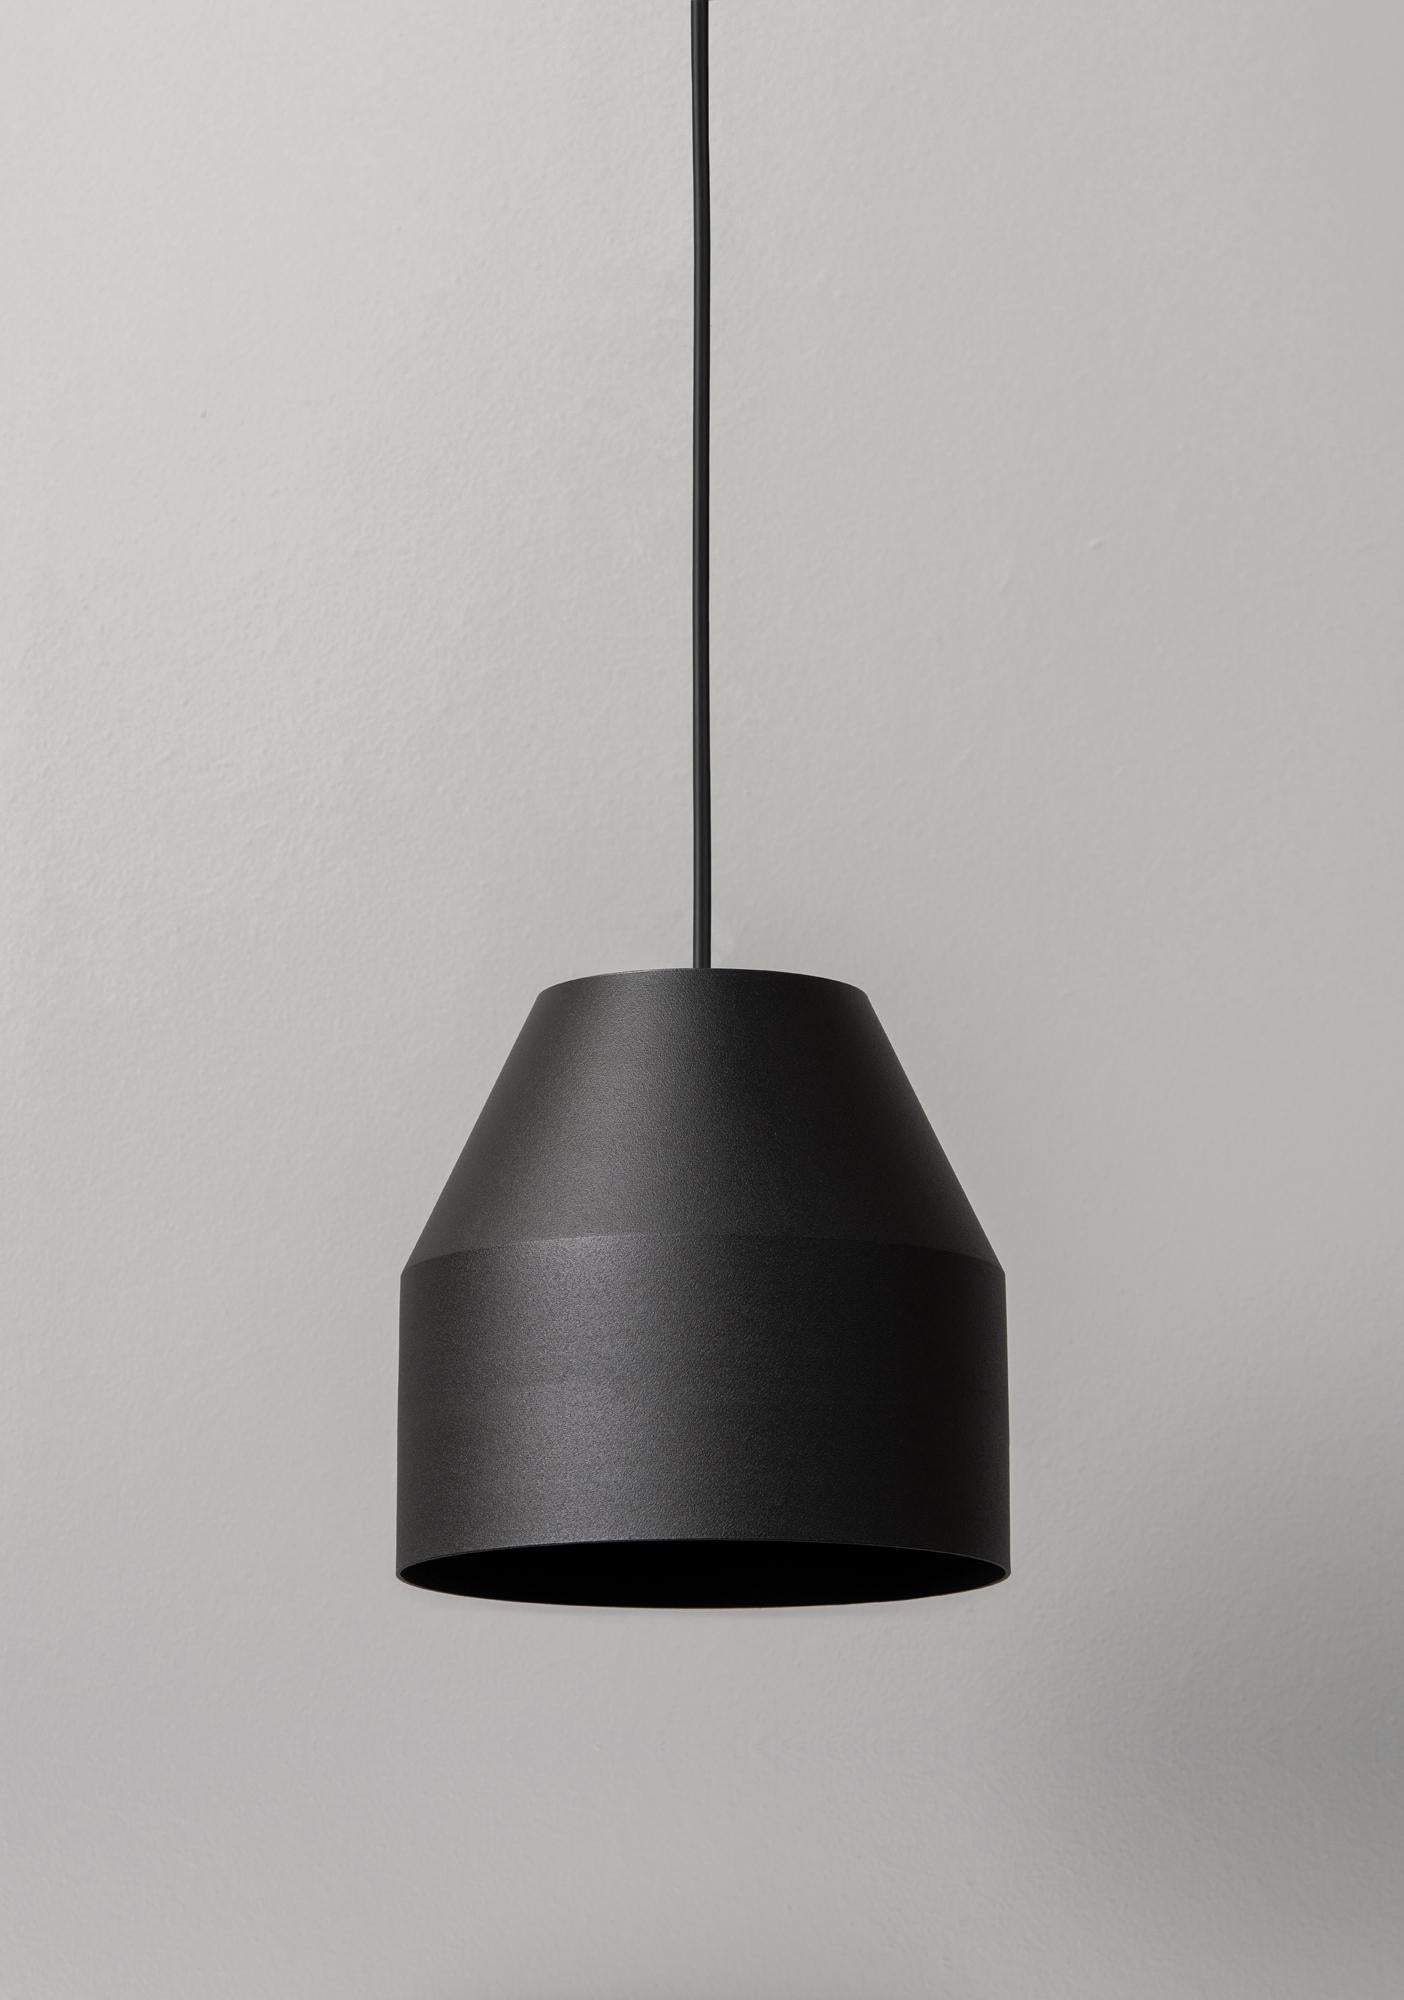 Big Black Cap Pendant Lamp by +kouple
Dimensions: Ø 16 x H 16,5 cm. 
Materials: Powder-coated steel.

Available in different color options. Available in two different sizes. The rod length is 200 cm. Please contact us.

All our lamps can be wired